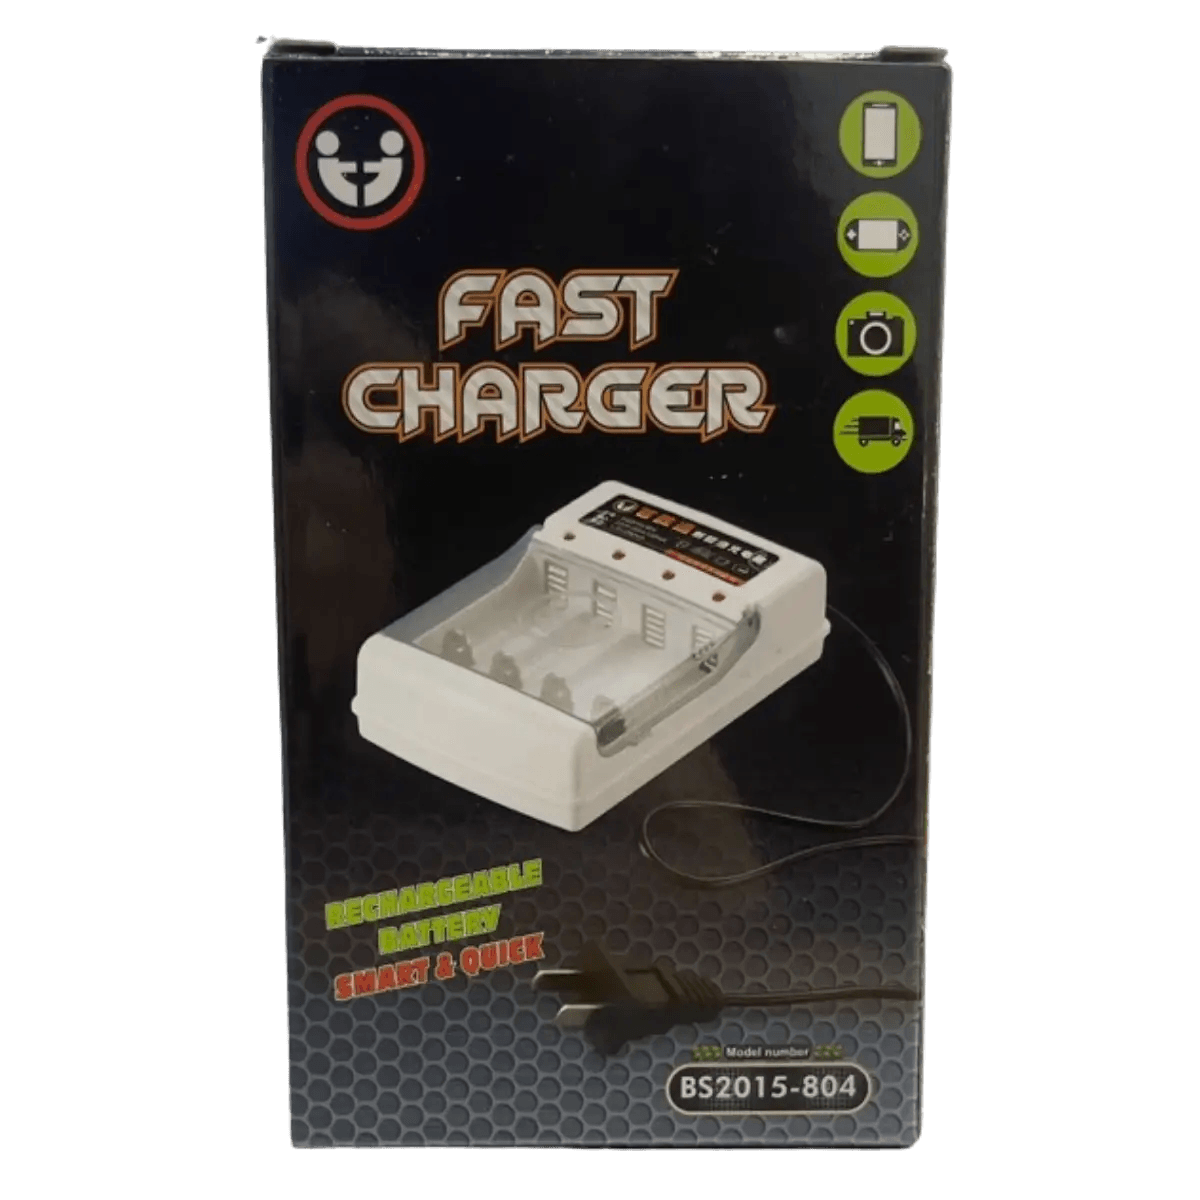 Chargeur pour batteries Ni-Mh et NiCd 1.2V AA et AAA